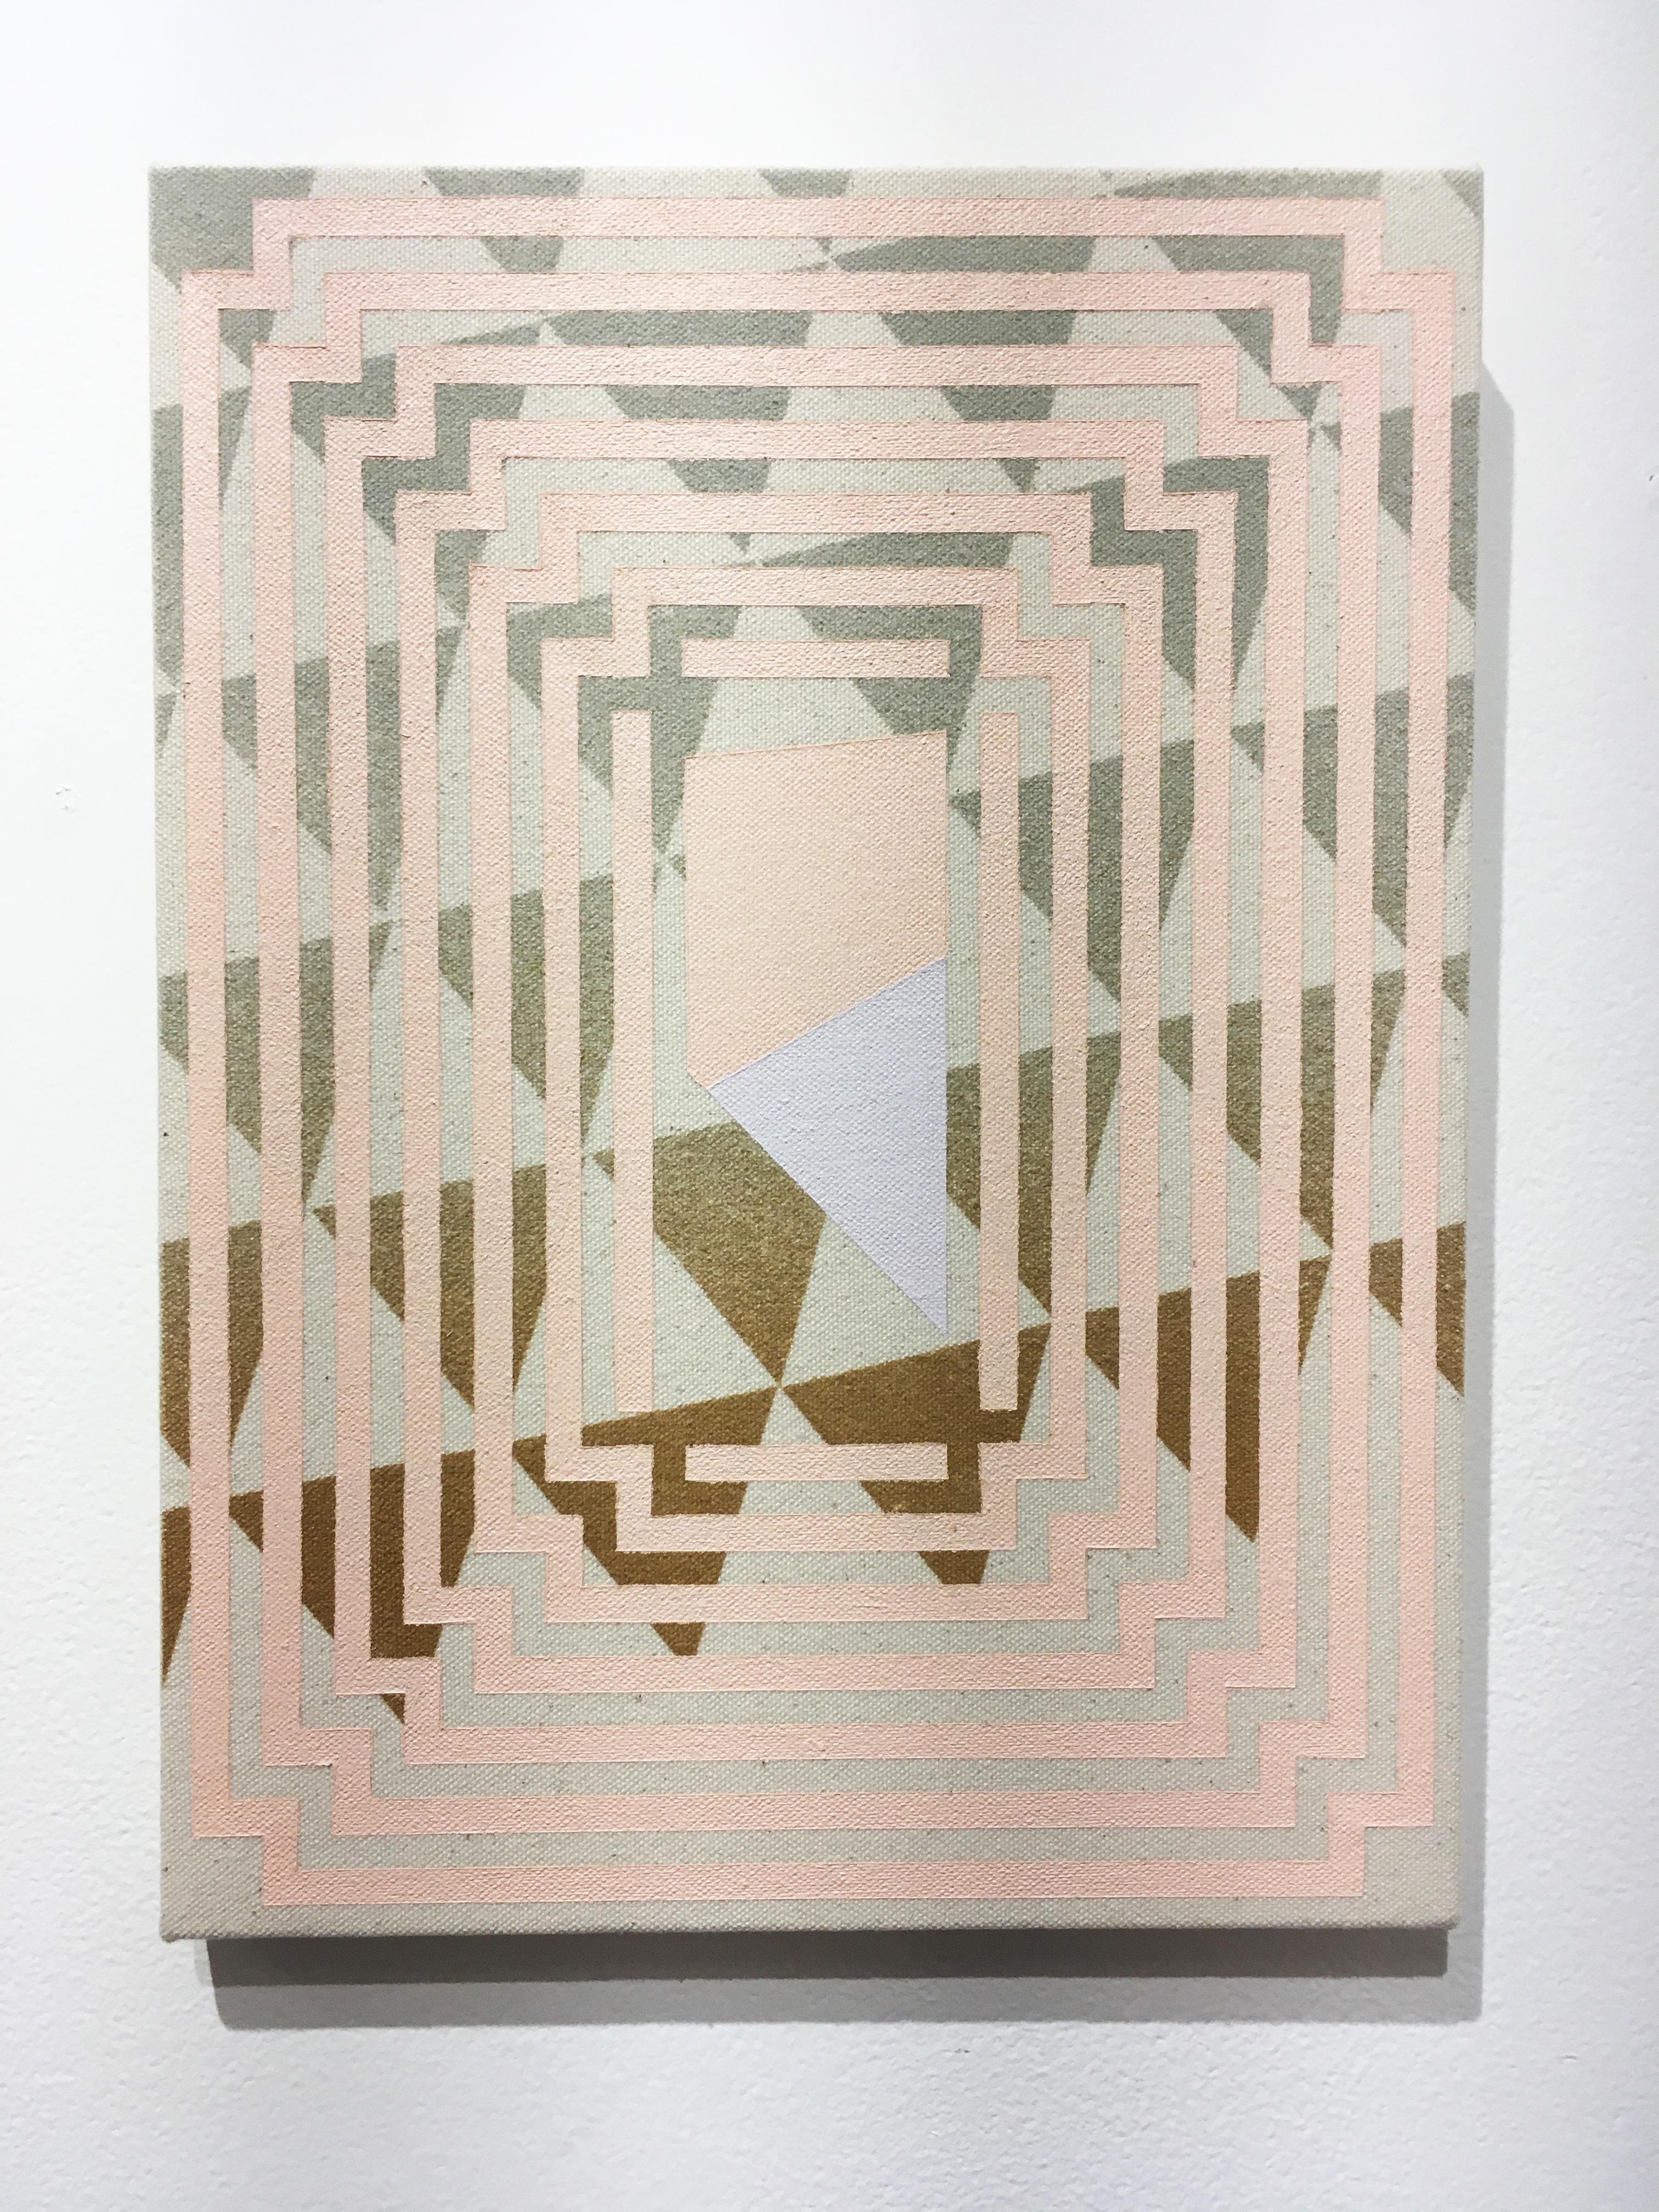 Posture, acrylic on canvas, abstract geometric, triangles, pink, brown